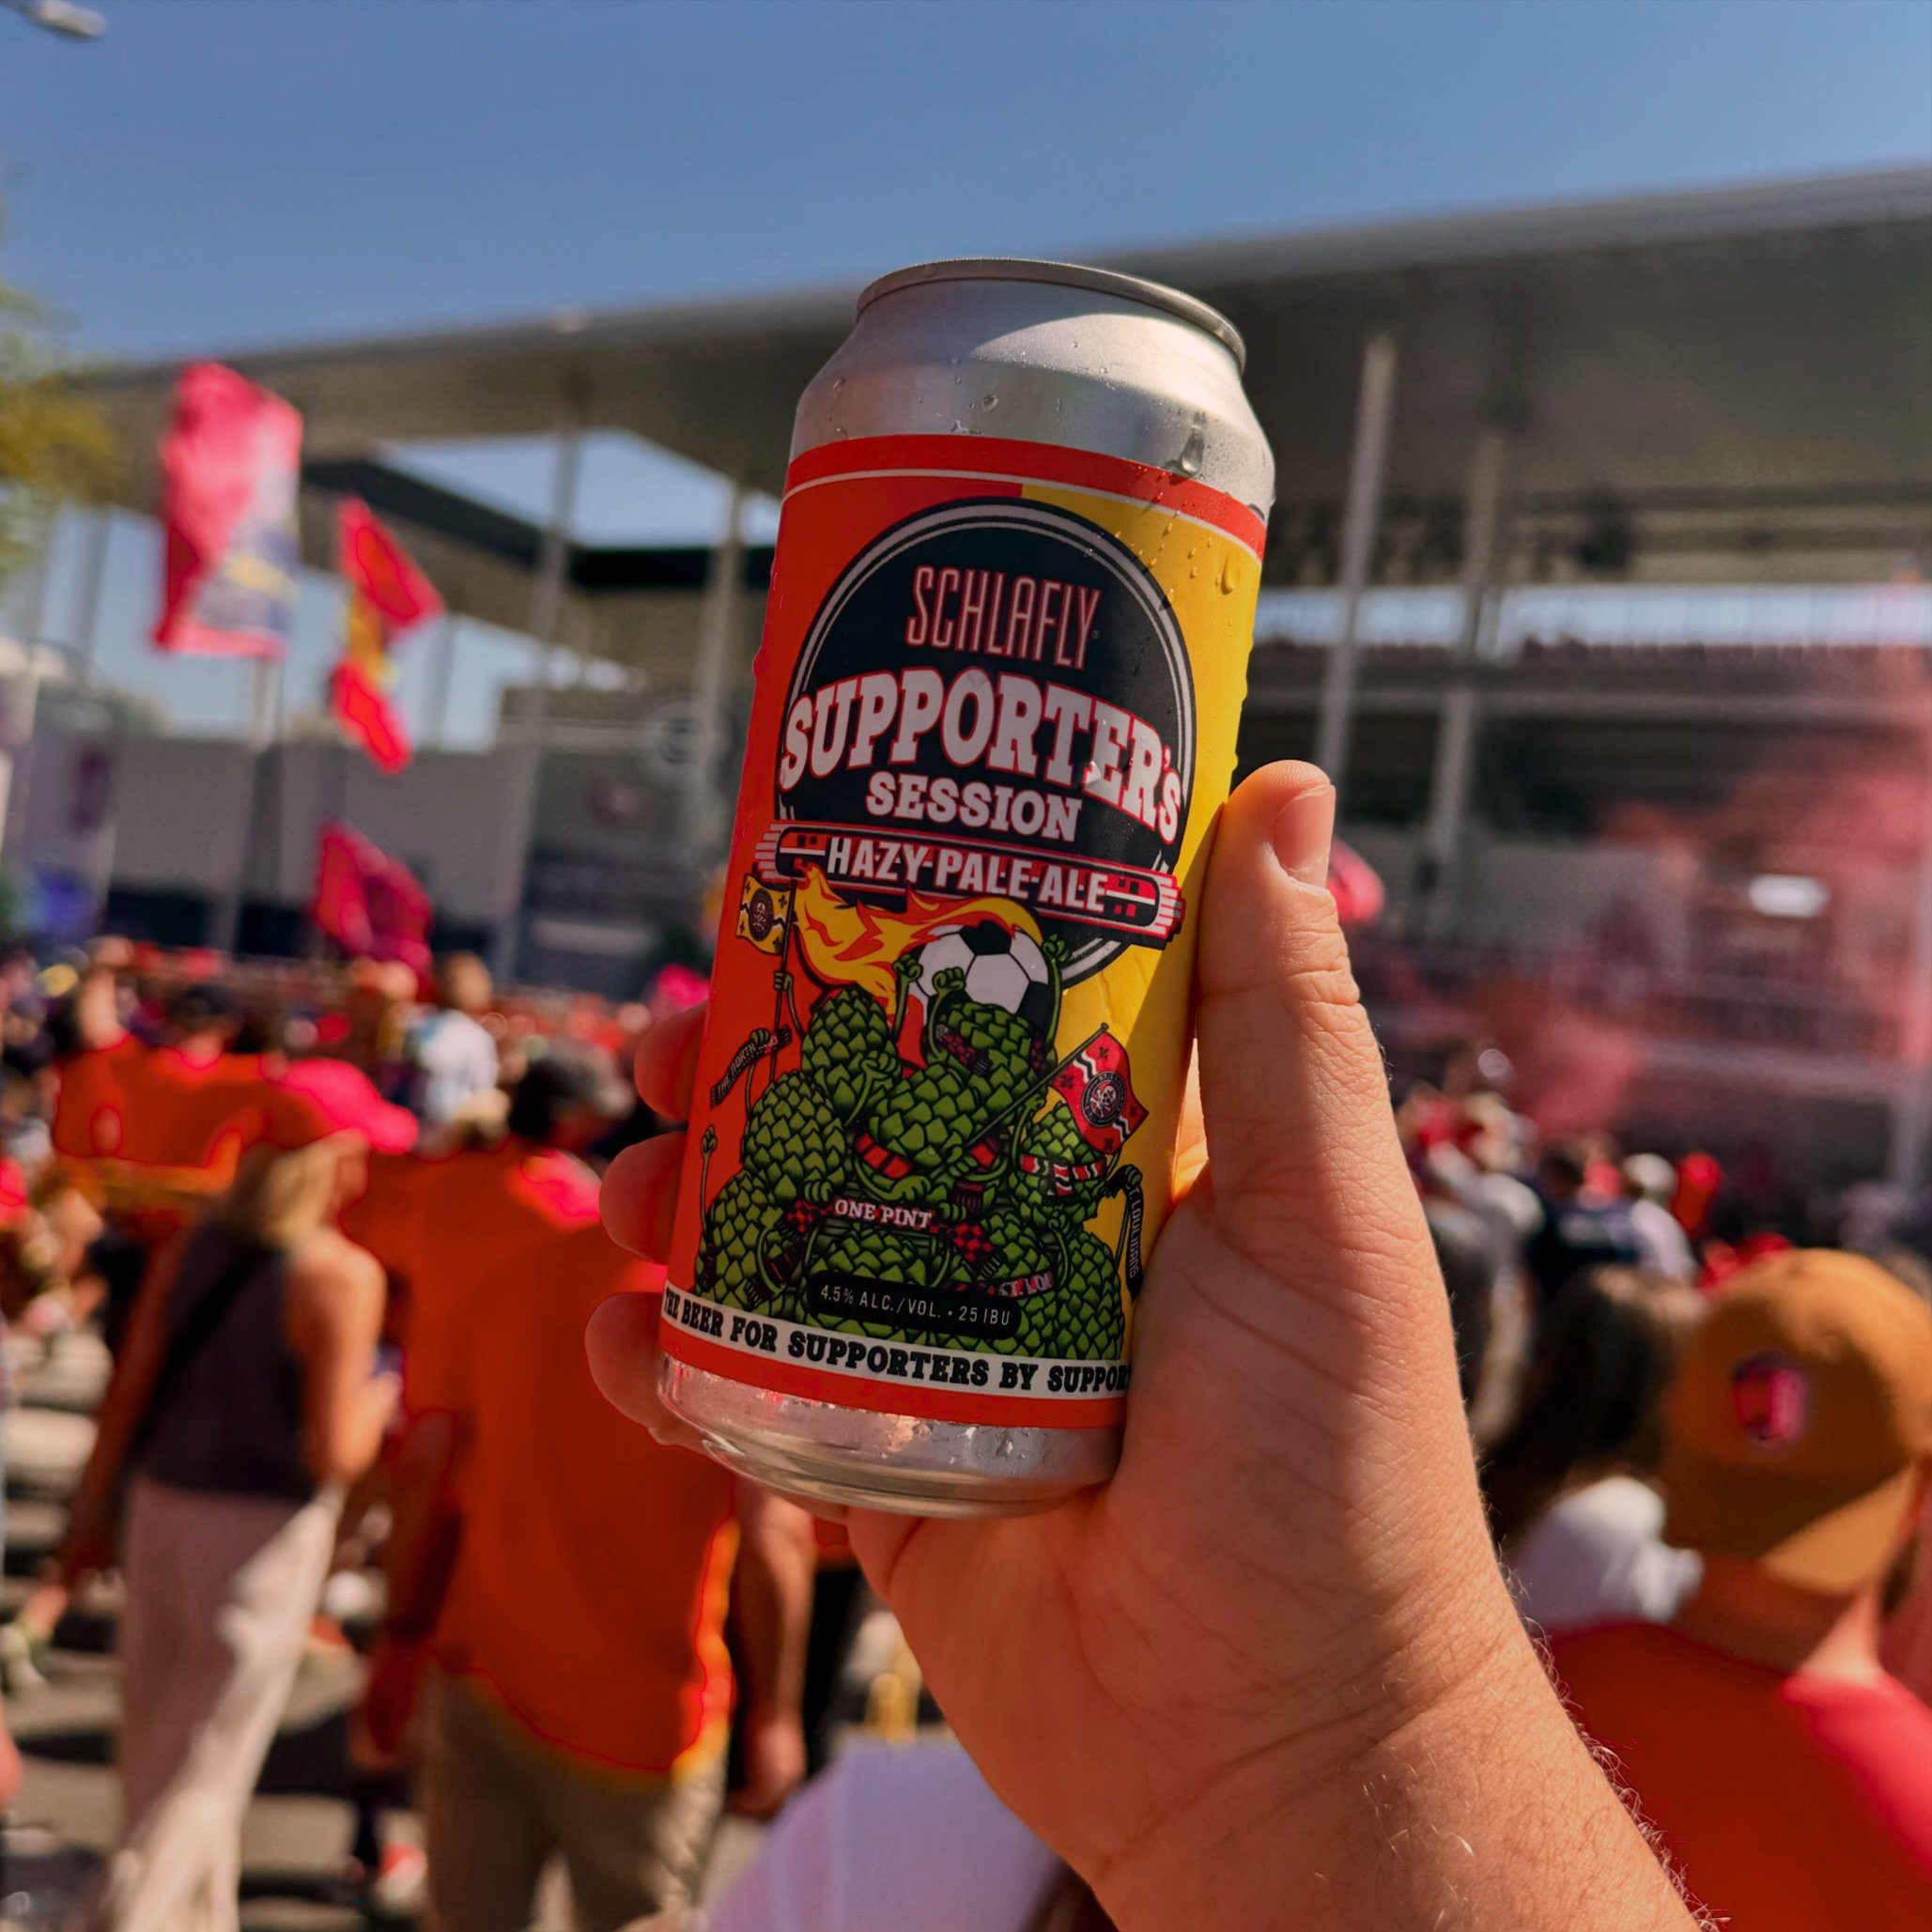 There&rsquo;s nothing more electric than being part of a @stlcitysc supporters march before game day; however a Supporter&rsquo;s Session Hazy Pale Ale by @schlaflybeer helps to add something extra to the excitement! 

#beer #craftbeer #beerlover #be